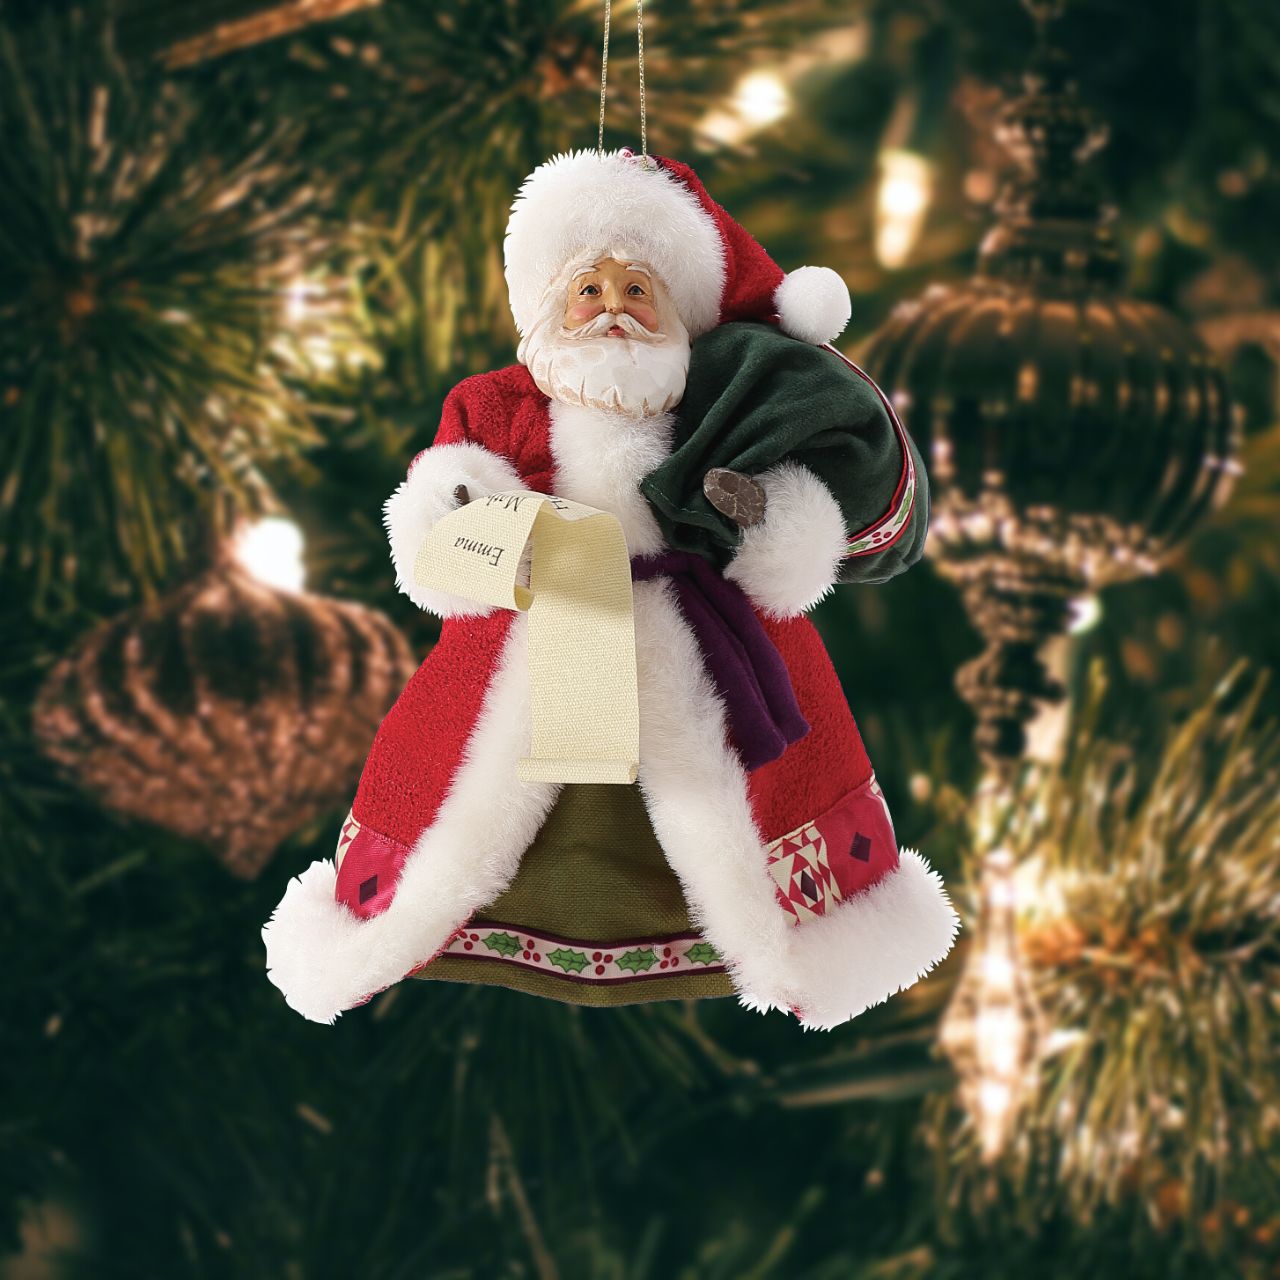 Jim Shore Limited Edition Santa Hanging Ornament  Designed by Jim Shore for Possible Dreams, this Santa ornament is dressed in Clothtique fabrics and fur. Limited Edition Ornament